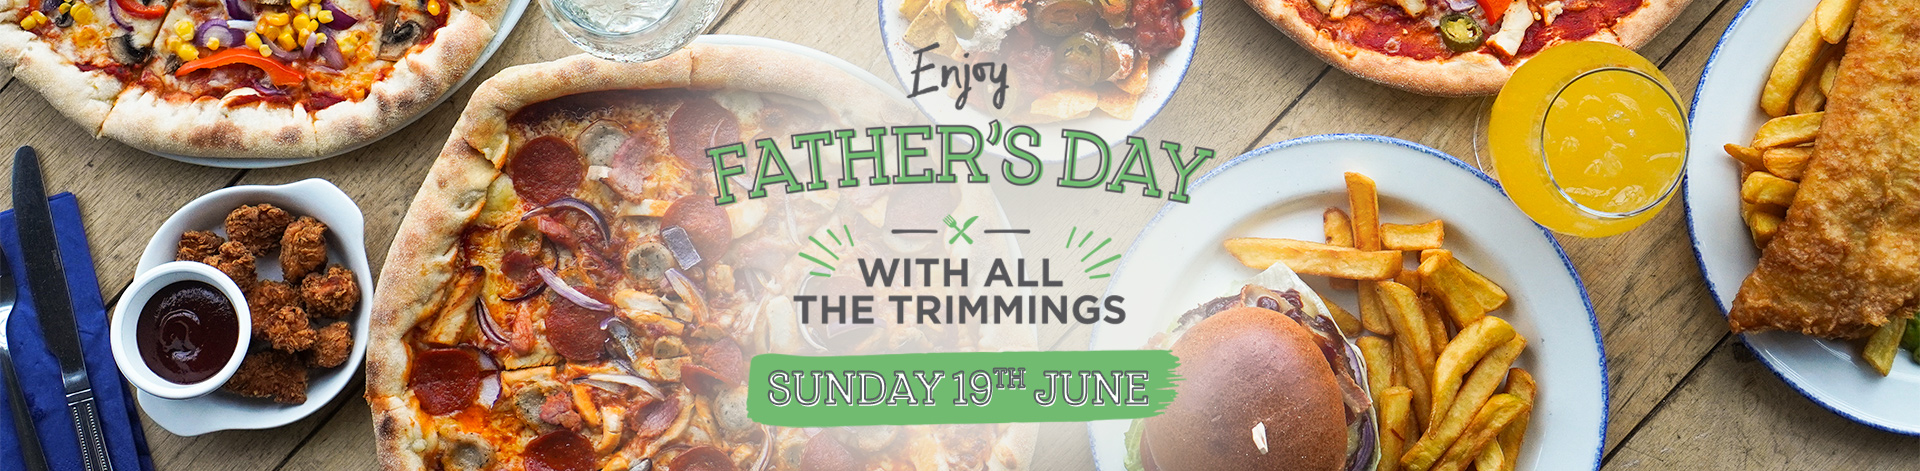 Fathers Day at The Barley Mow, Studley